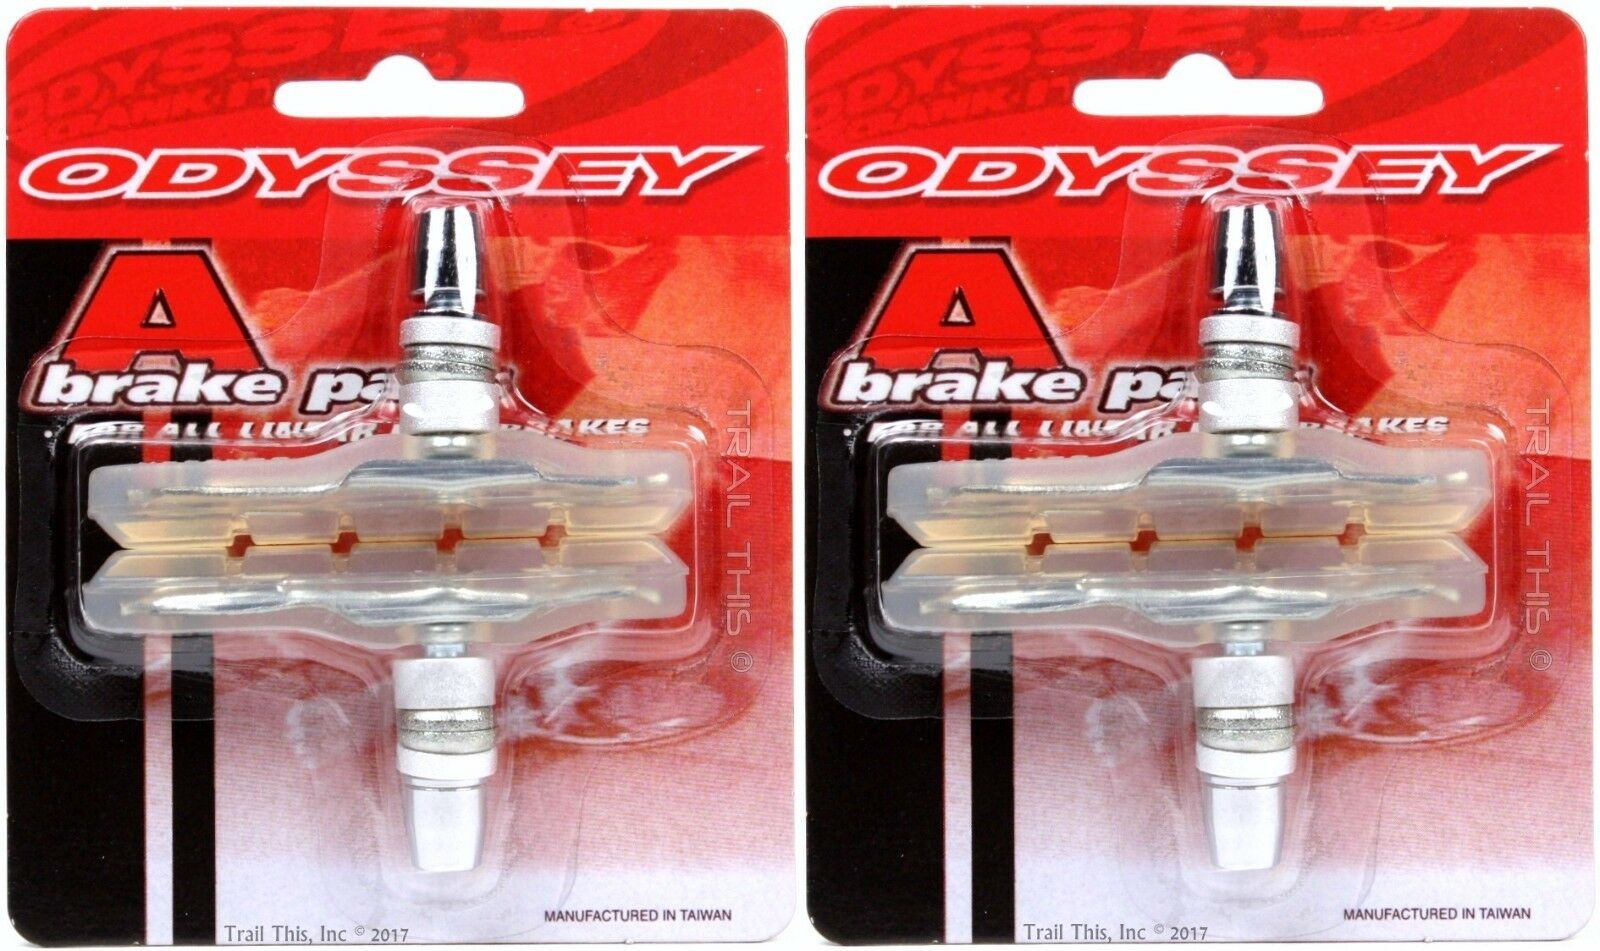 2-pack Odyssey A-brake Clear Bmx Bicycle Brake Pads / Shoes Threaded Posts Soft